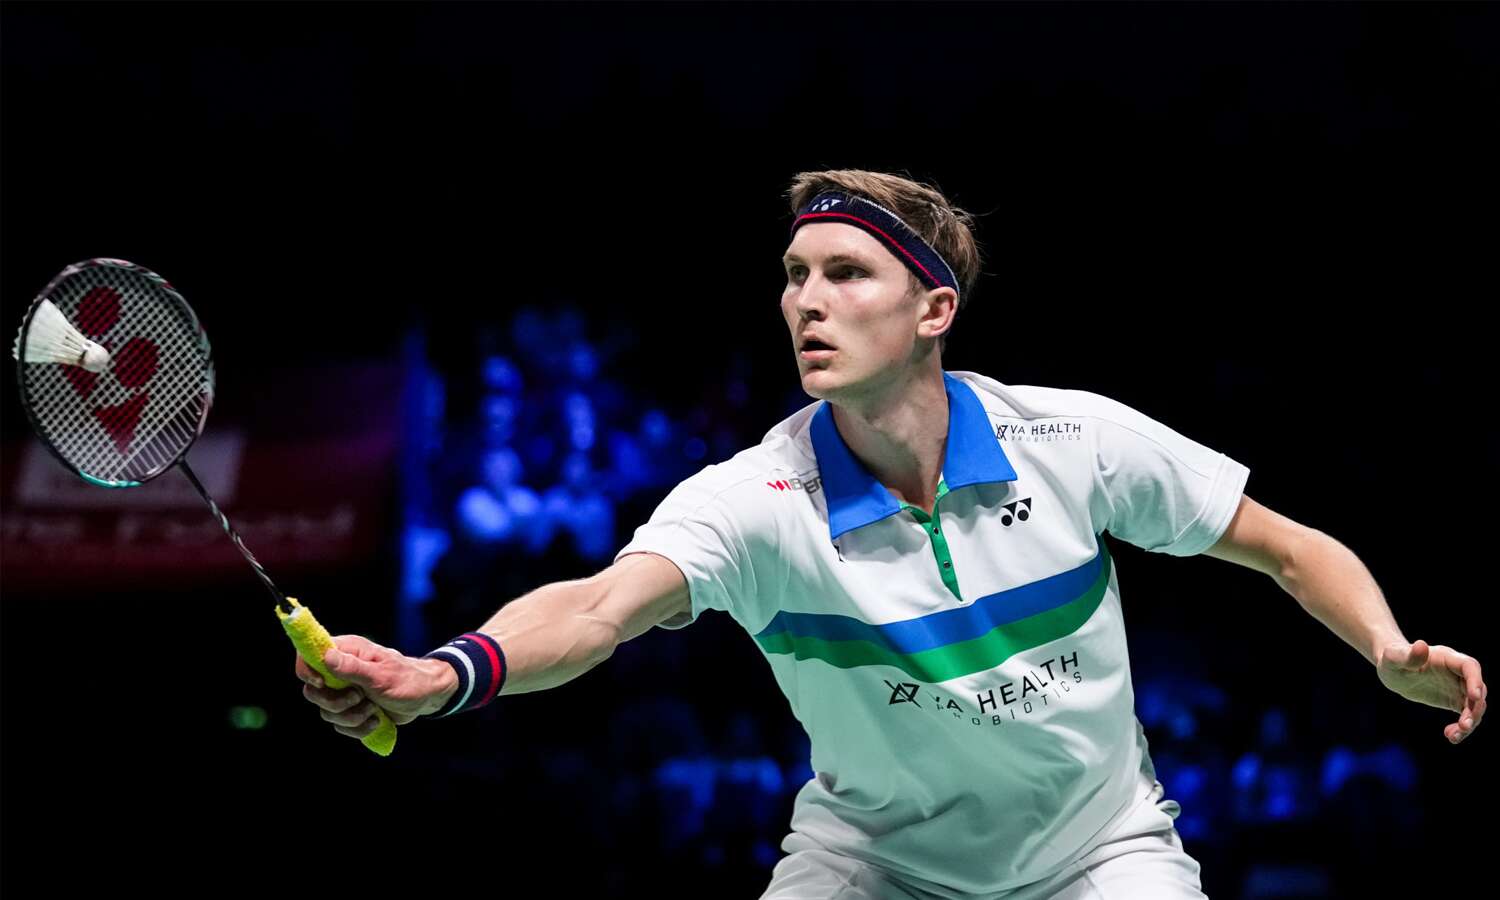 Swiss Open Badminton All you need to know about Swiss Open 2023, Check Draws, Top seeds, LIVE streaming details